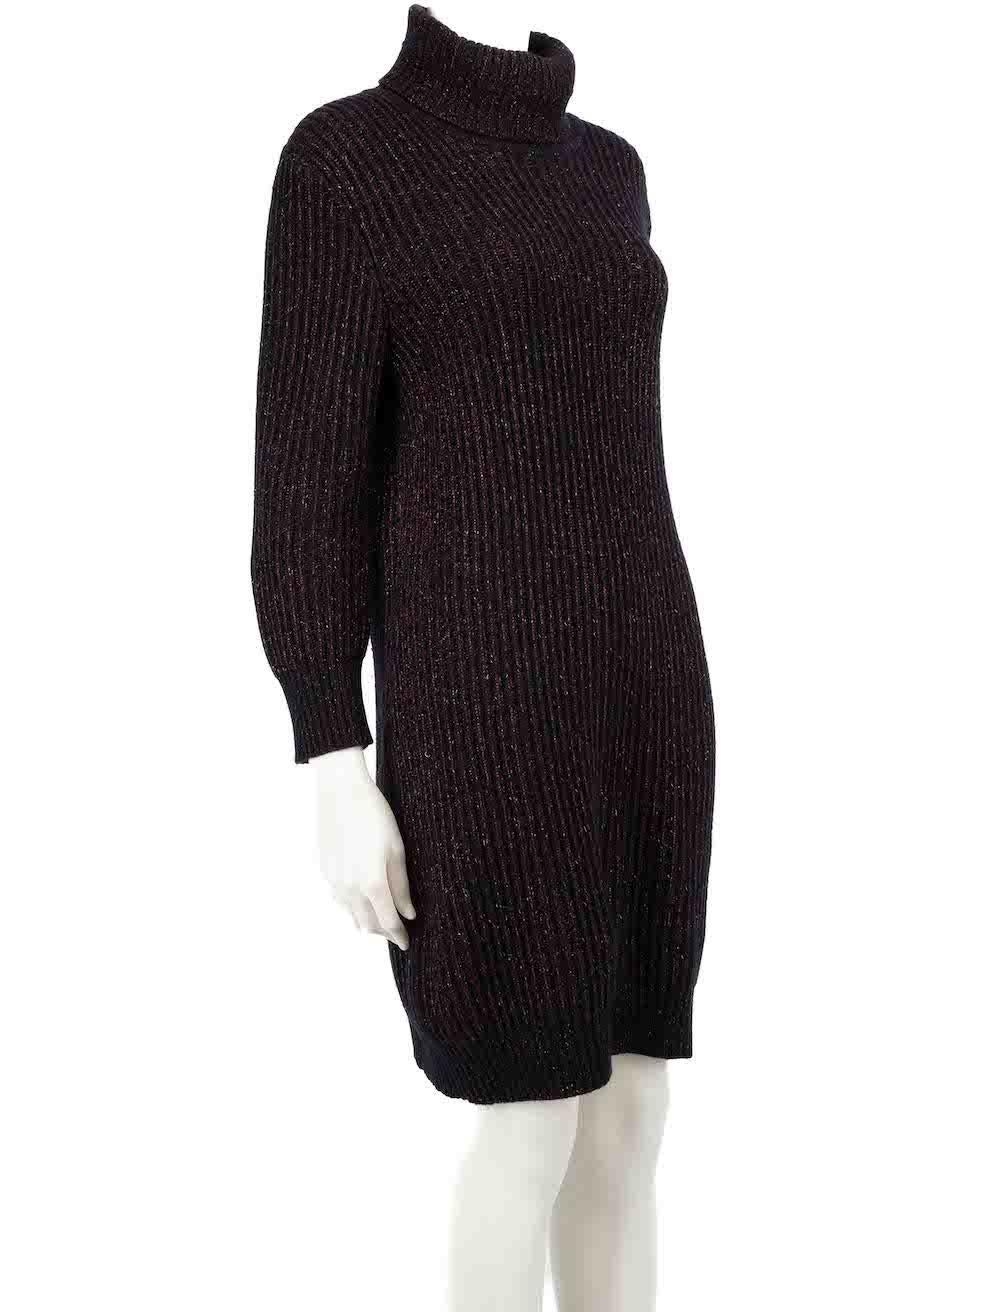 CONDITION is Very good. Minimal wear to dress is evident. Minimal wear to the brand label at the rear neckline lining with discolouration on this used Chanel designer resale item.
 
 
 
 Details
 
 
 Navy
 
 Cashmere
 
 Sweater dress
 
 Mini length
